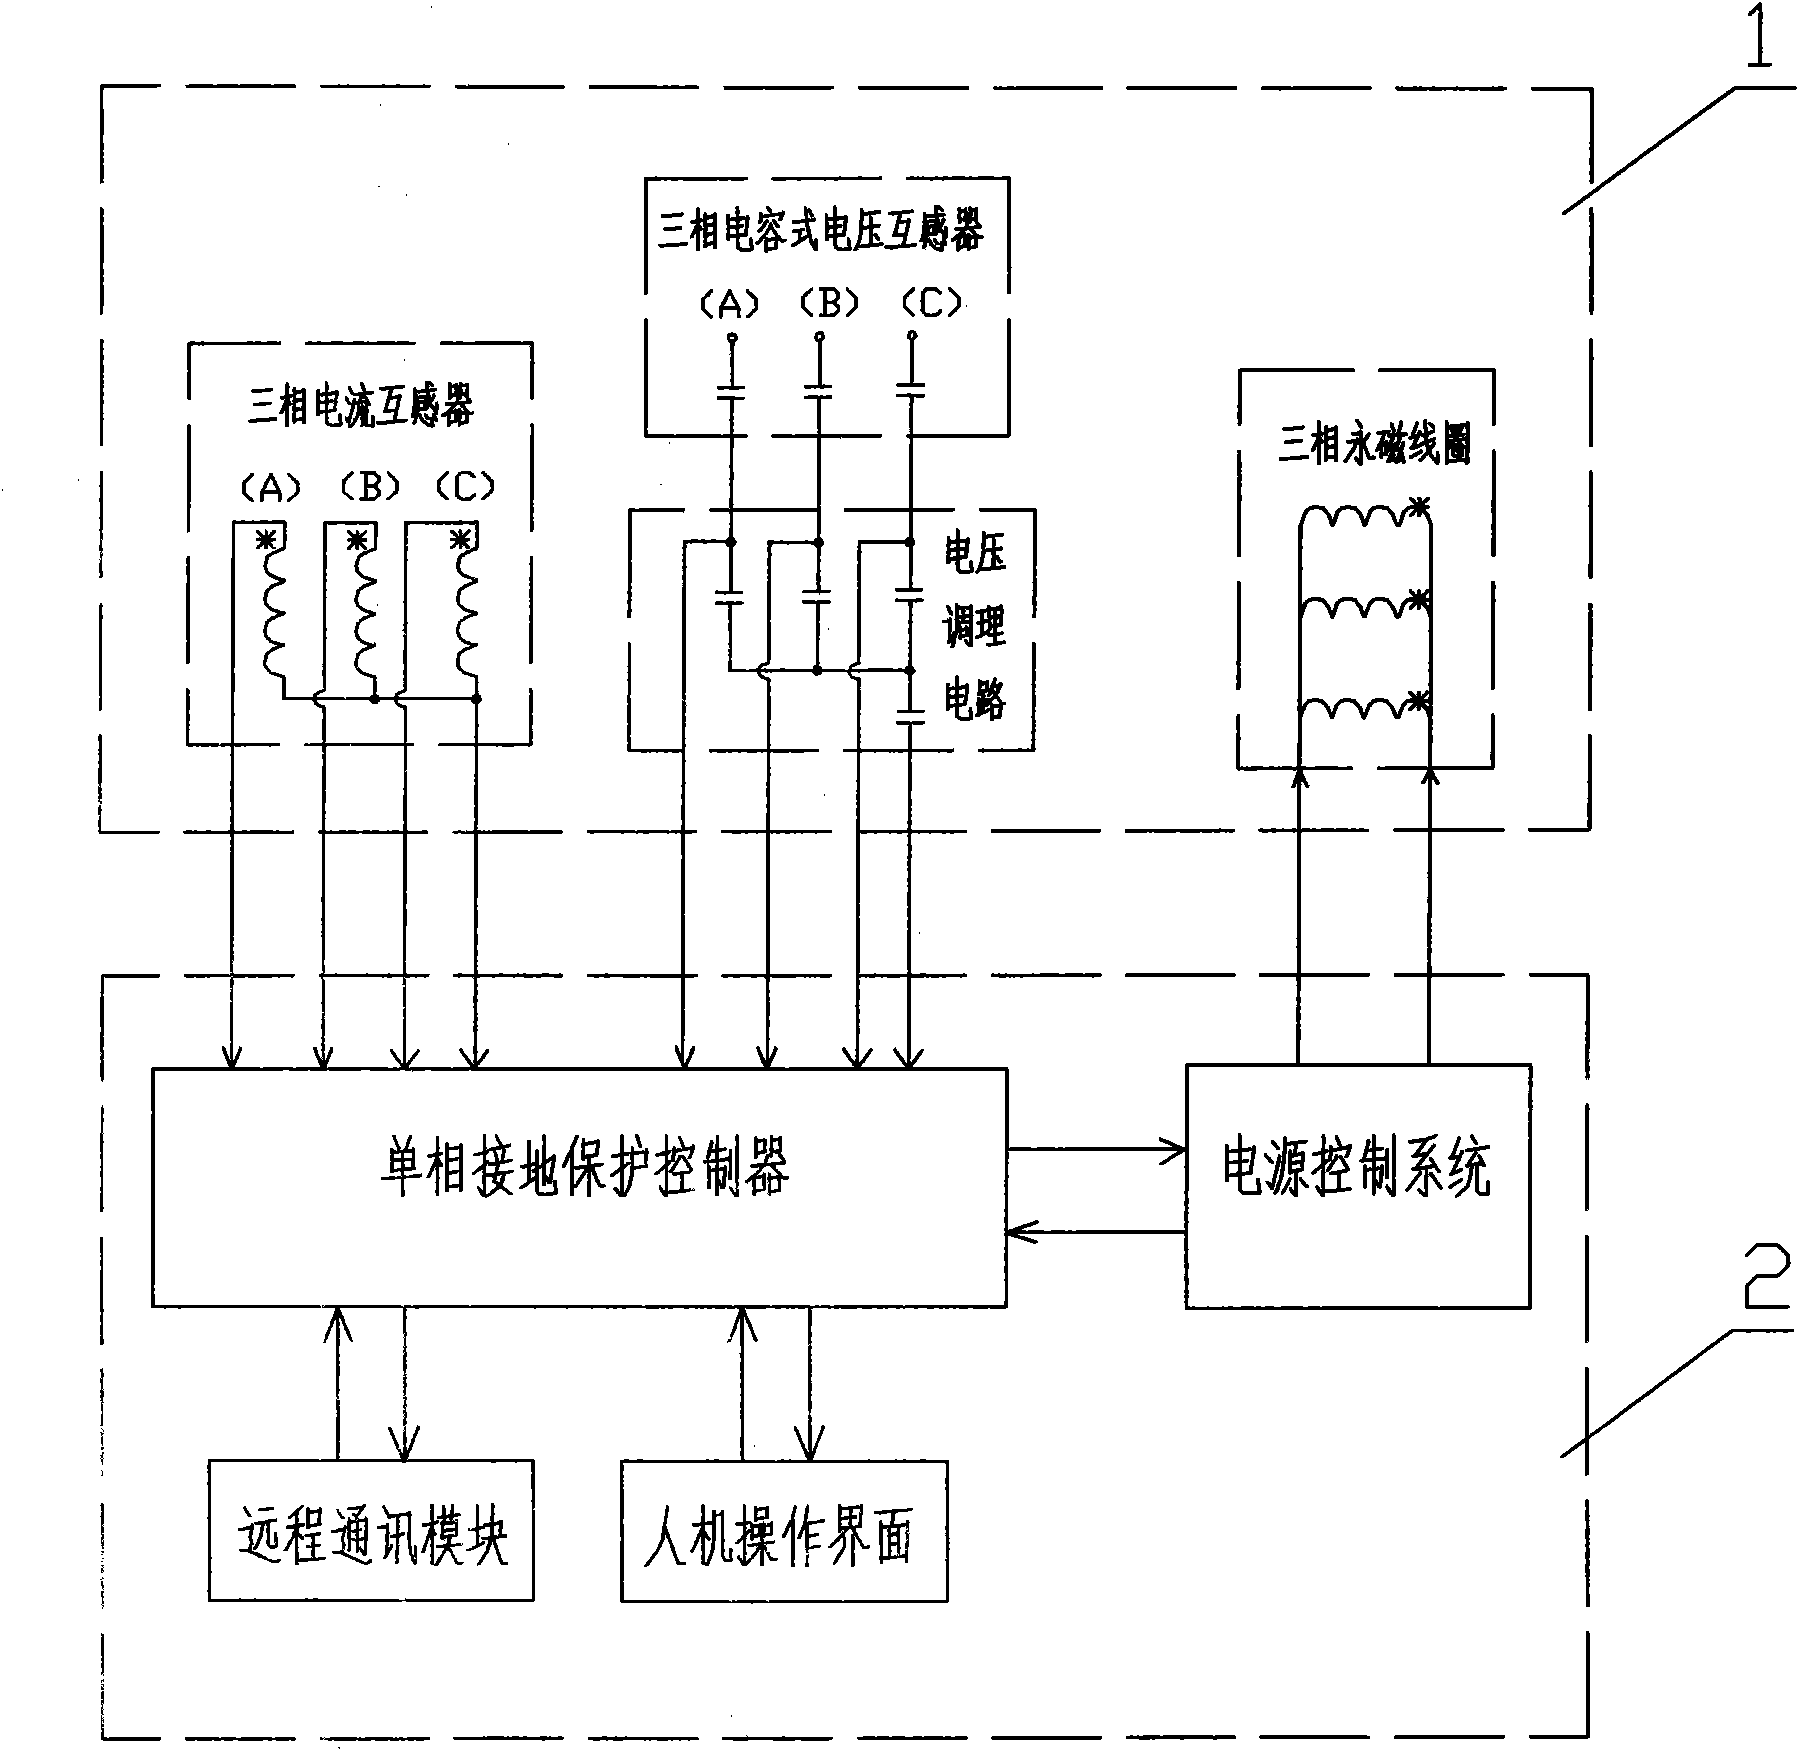 One-phase ground protection measurement and control system of high-voltage breaker